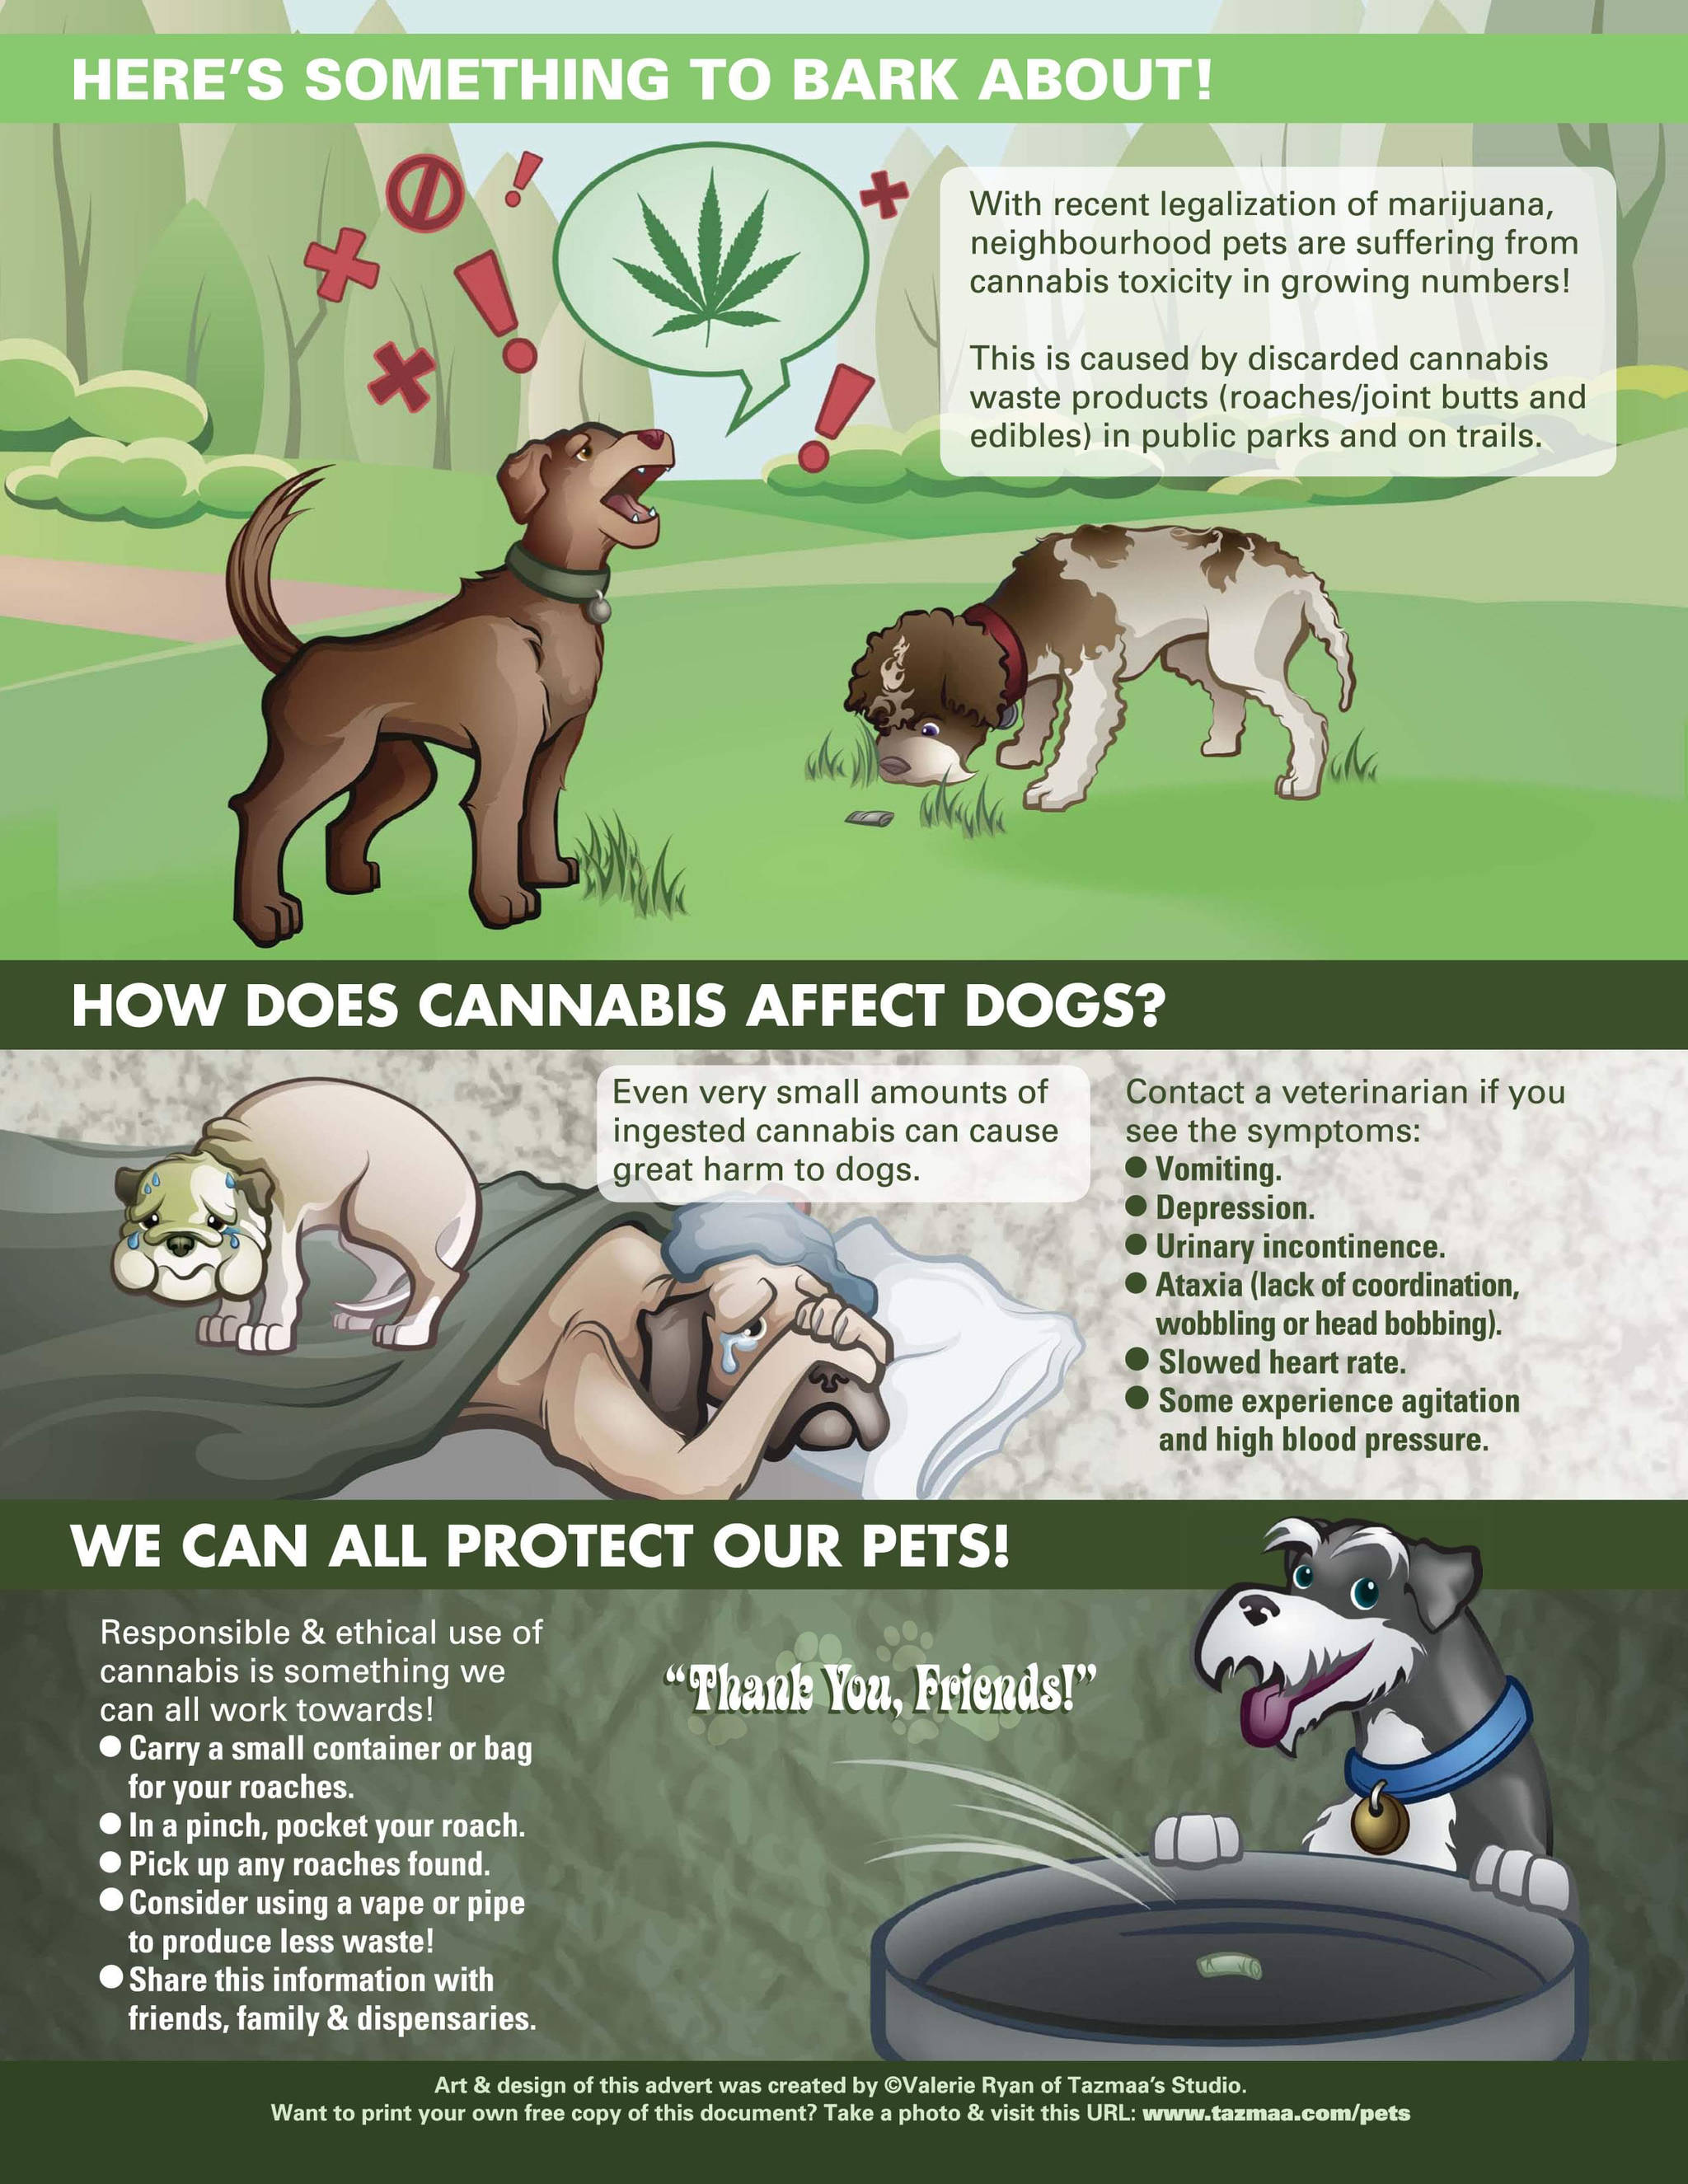 24680716_web1_210329-LAT-Dog-sicked-by-Cannabis-poster_1